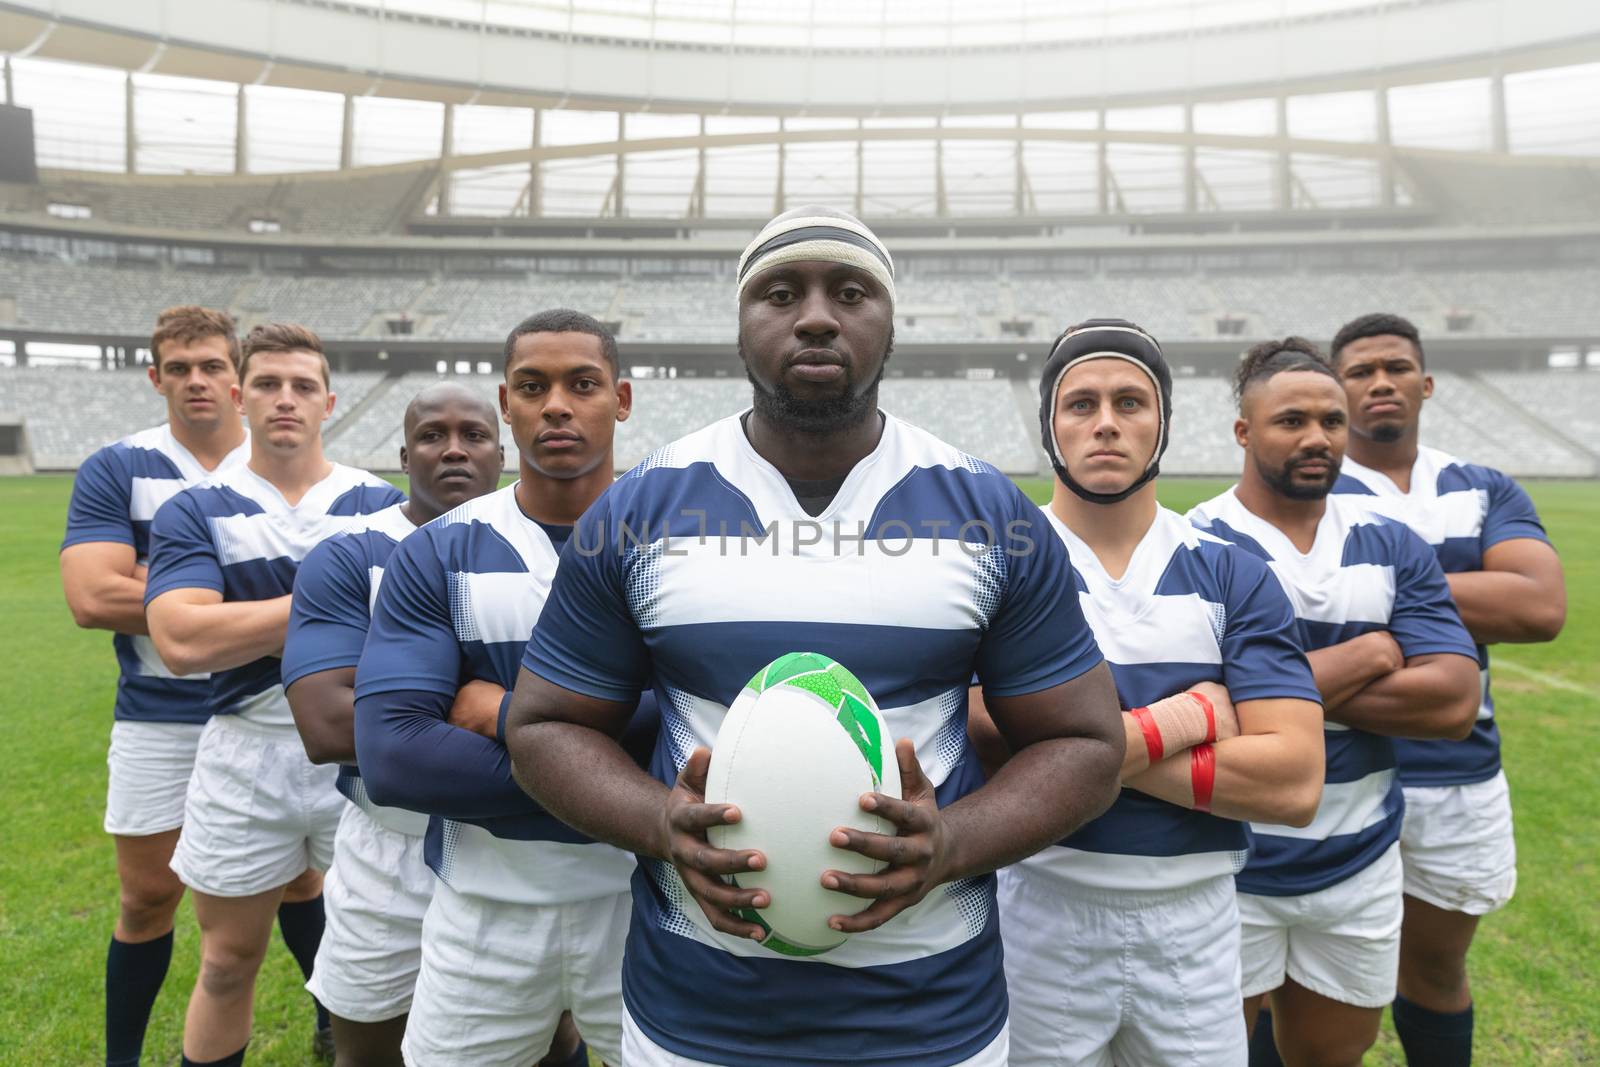 Portrait of group of diverse male rugby players standing together with rugby ball in stadium